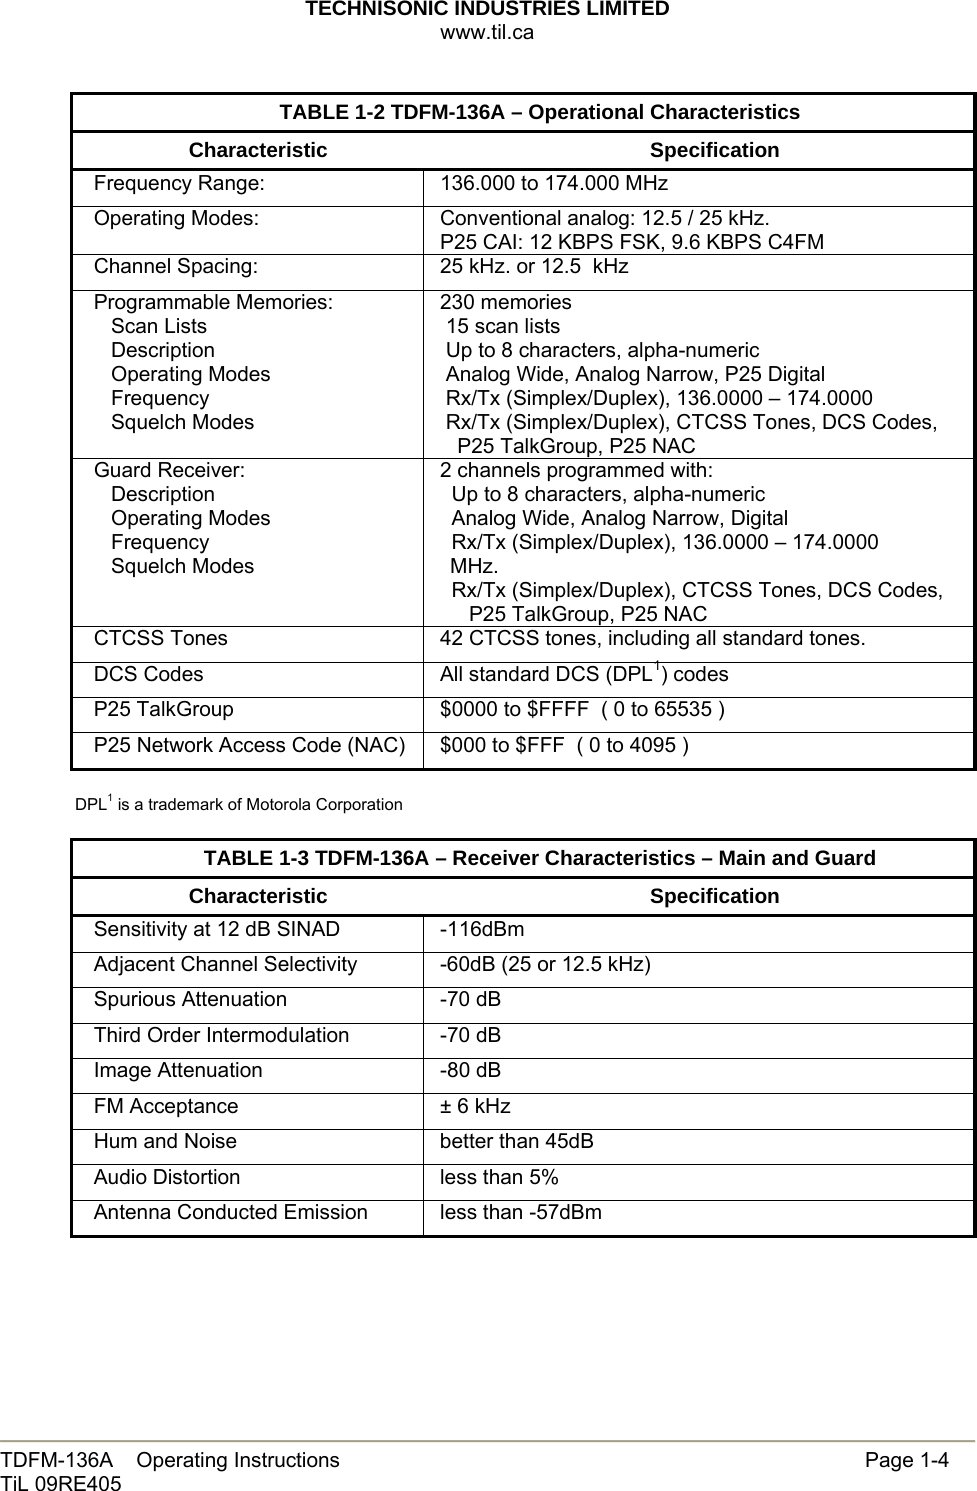 TECHNISONIC INDUSTRIES LIMITED www.til.ca   TDFM-136A    Operating Instructions                     Page 1-4 TiL 09RE405   TABLE 1-2 TDFM-136A – Operational Characteristics Characteristic Specification Frequency Range:  136.000 to 174.000 MHz Operating Modes:  Conventional analog: 12.5 / 25 kHz. P25 CAI: 12 KBPS FSK, 9.6 KBPS C4FM Channel Spacing:  25 kHz. or 12.5  kHz Programmable Memories:    Scan Lists    Description    Operating Modes    Frequency    Squelch Modes 230 memories  15 scan lists  Up to 8 characters, alpha-numeric   Analog Wide, Analog Narrow, P25 Digital  Rx/Tx (Simplex/Duplex), 136.0000 – 174.0000  Rx/Tx (Simplex/Duplex), CTCSS Tones, DCS Codes,    P25 TalkGroup, P25 NAC Guard Receiver:    Description    Operating Modes    Frequency    Squelch Modes 2 channels programmed with:   Up to 8 characters, alpha-numeric    Analog Wide, Analog Narrow, Digital   Rx/Tx (Simplex/Duplex), 136.0000 – 174.0000 MHz.   Rx/Tx (Simplex/Duplex), CTCSS Tones, DCS Codes,      P25 TalkGroup, P25 NAC CTCSS Tones  42 CTCSS tones, including all standard tones. DCS Codes  All standard DCS (DPL1) codes P25 TalkGroup  $0000 to $FFFF  ( 0 to 65535 )  P25 Network Access Code (NAC)  $000 to $FFF  ( 0 to 4095 )  DPL1 is a trademark of Motorola Corporation  TABLE 1-3 TDFM-136A – Receiver Characteristics – Main and Guard Characteristic Specification Sensitivity at 12 dB SINAD  -116dBm Adjacent Channel Selectivity  -60dB (25 or 12.5 kHz) Spurious Attenuation  -70 dB Third Order Intermodulation  -70 dB Image Attenuation  -80 dB FM Acceptance   ± 6 kHz Hum and Noise  better than 45dB Audio Distortion  less than 5% Antenna Conducted Emission  less than -57dBm      